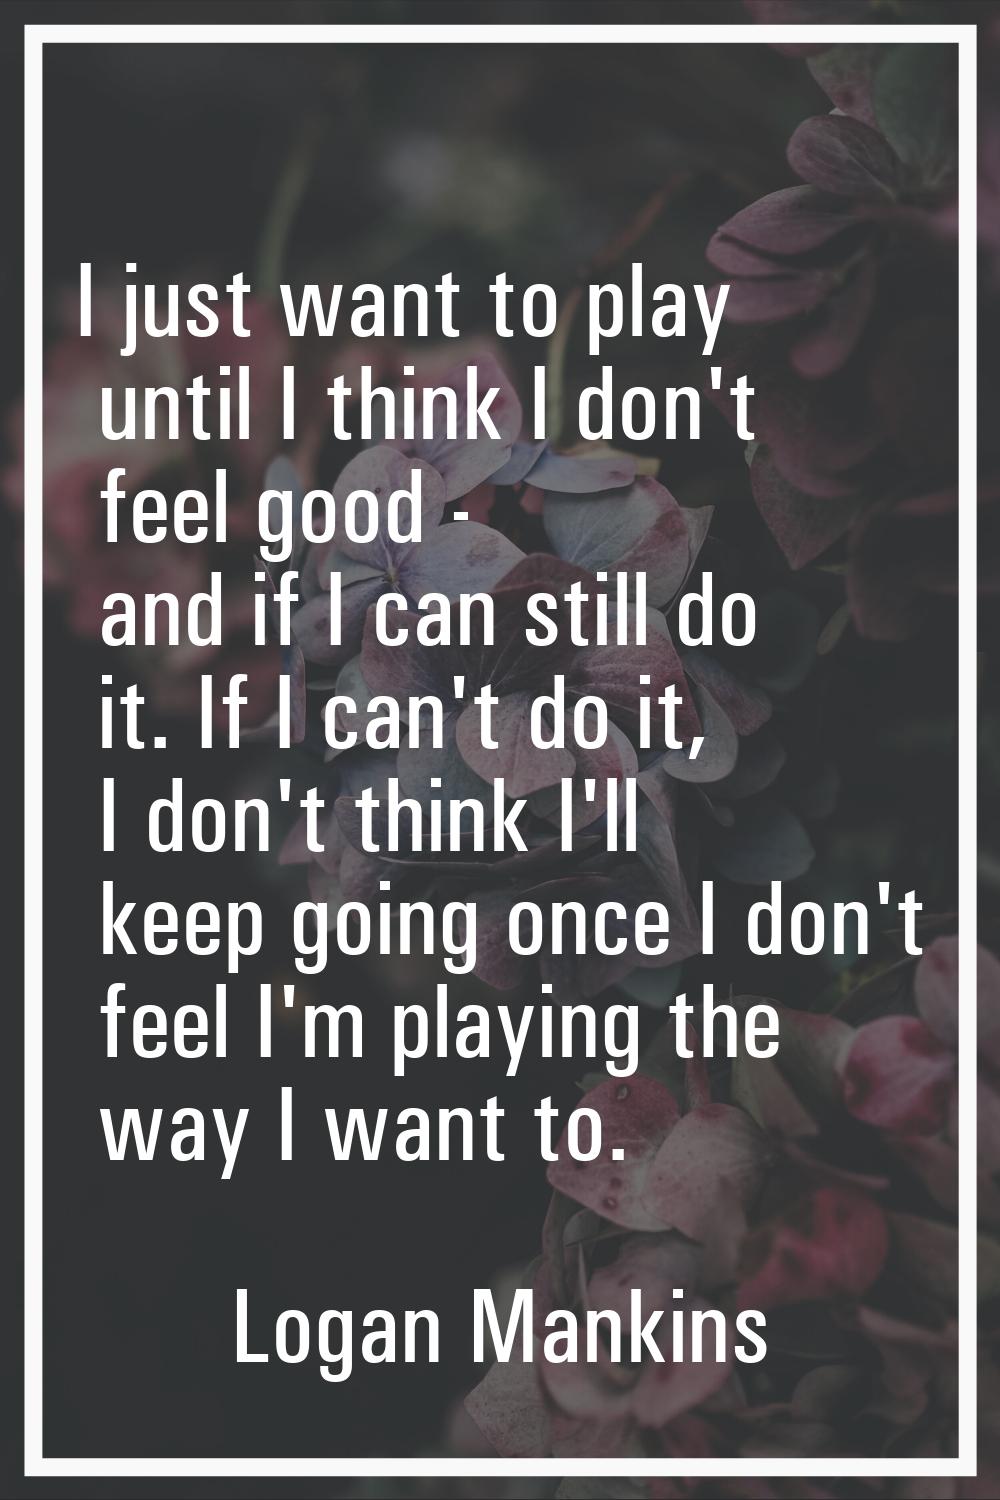 I just want to play until I think I don't feel good - and if I can still do it. If I can't do it, I